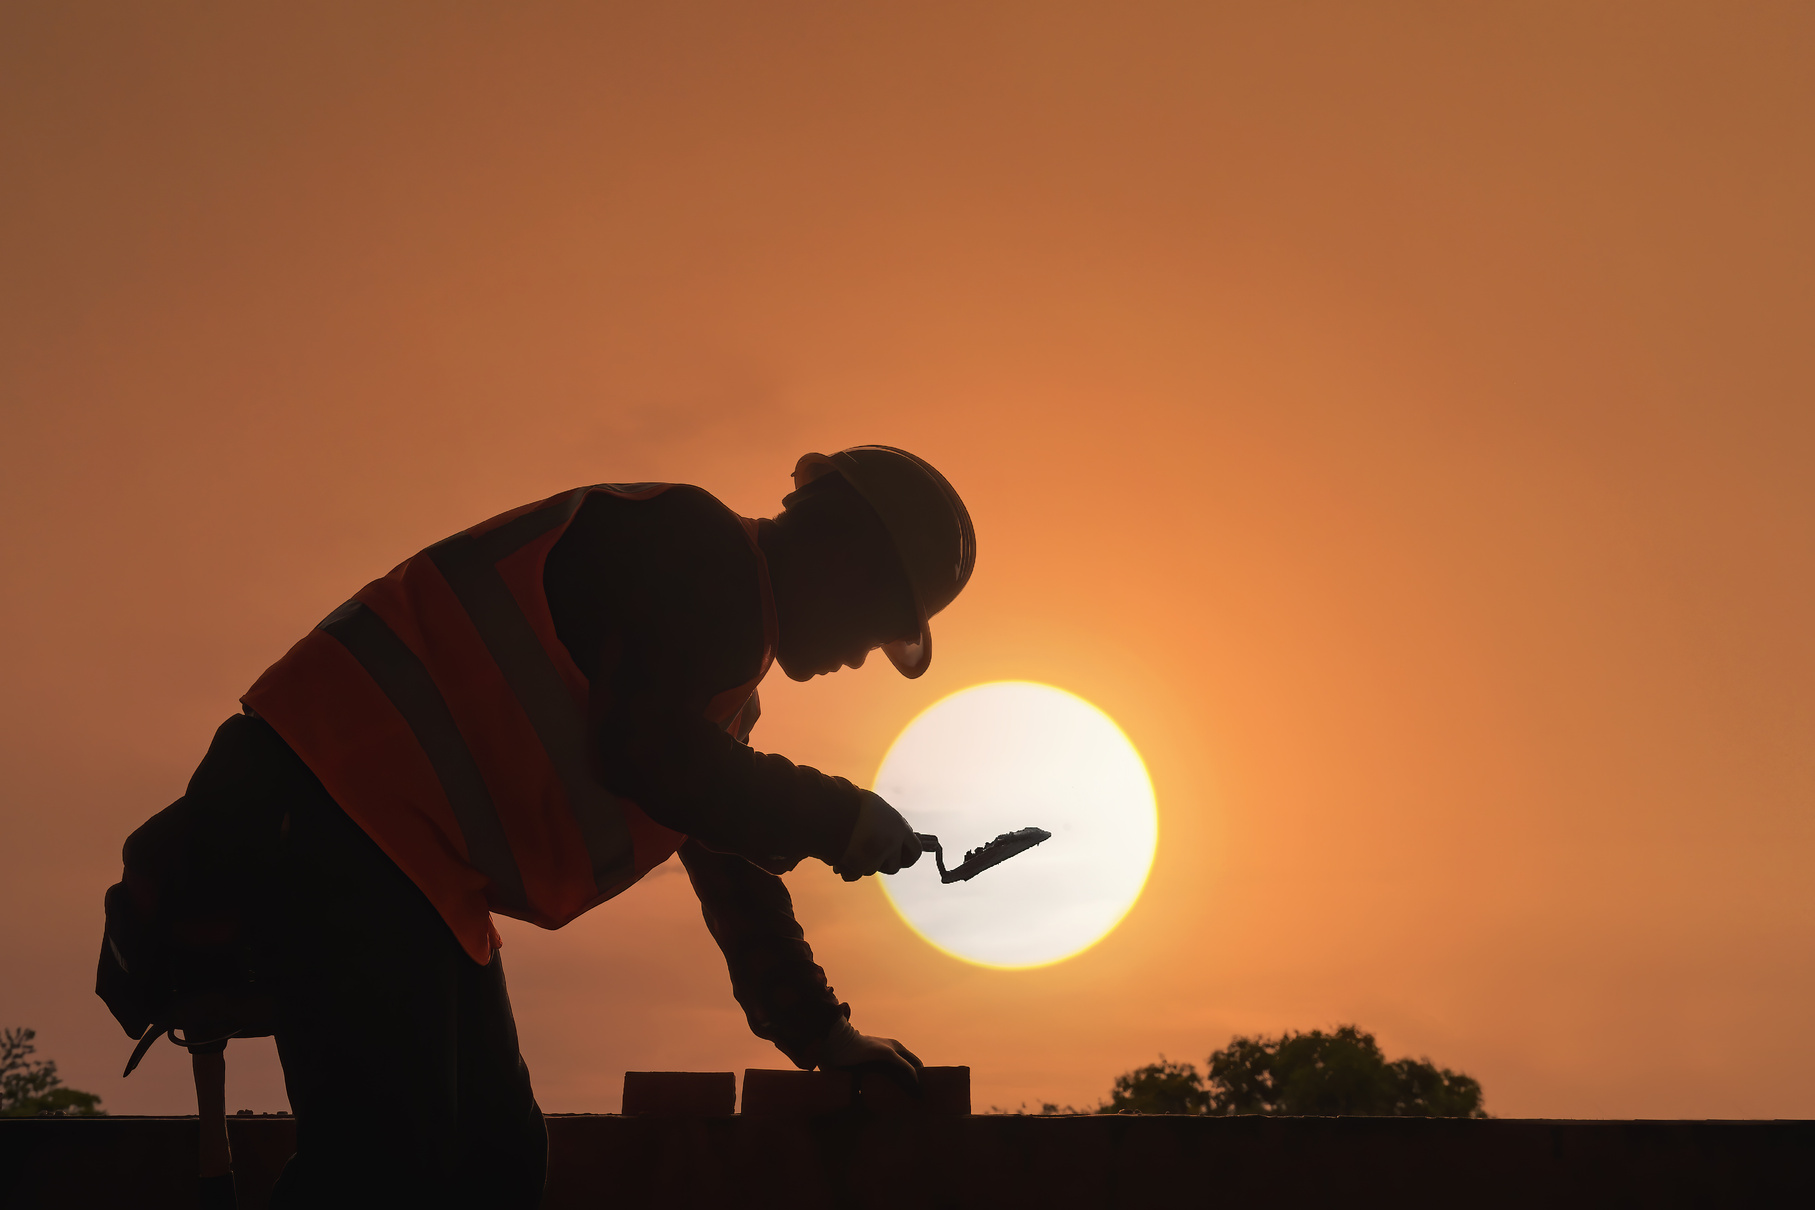 Construction Worker at Sunset